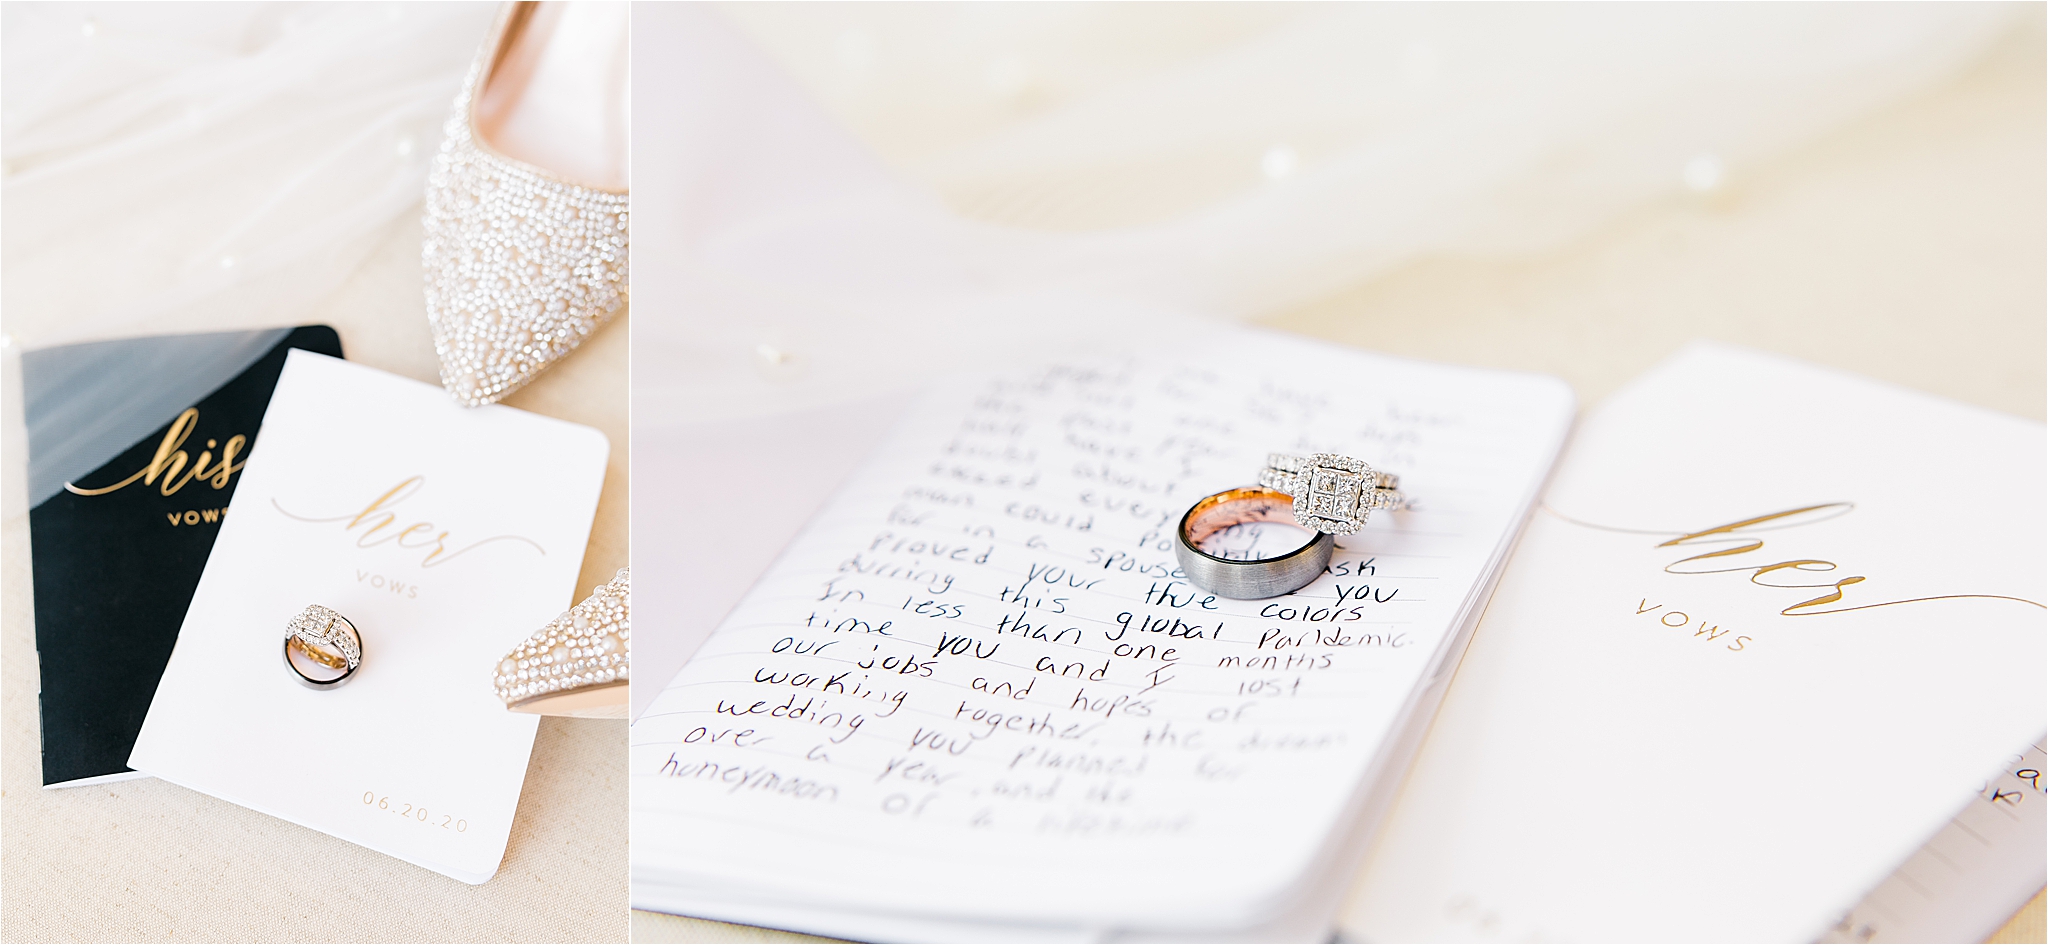 Custom Wedding vow books and the wedding rings on top of personally written wedding vows in Plano, Texas